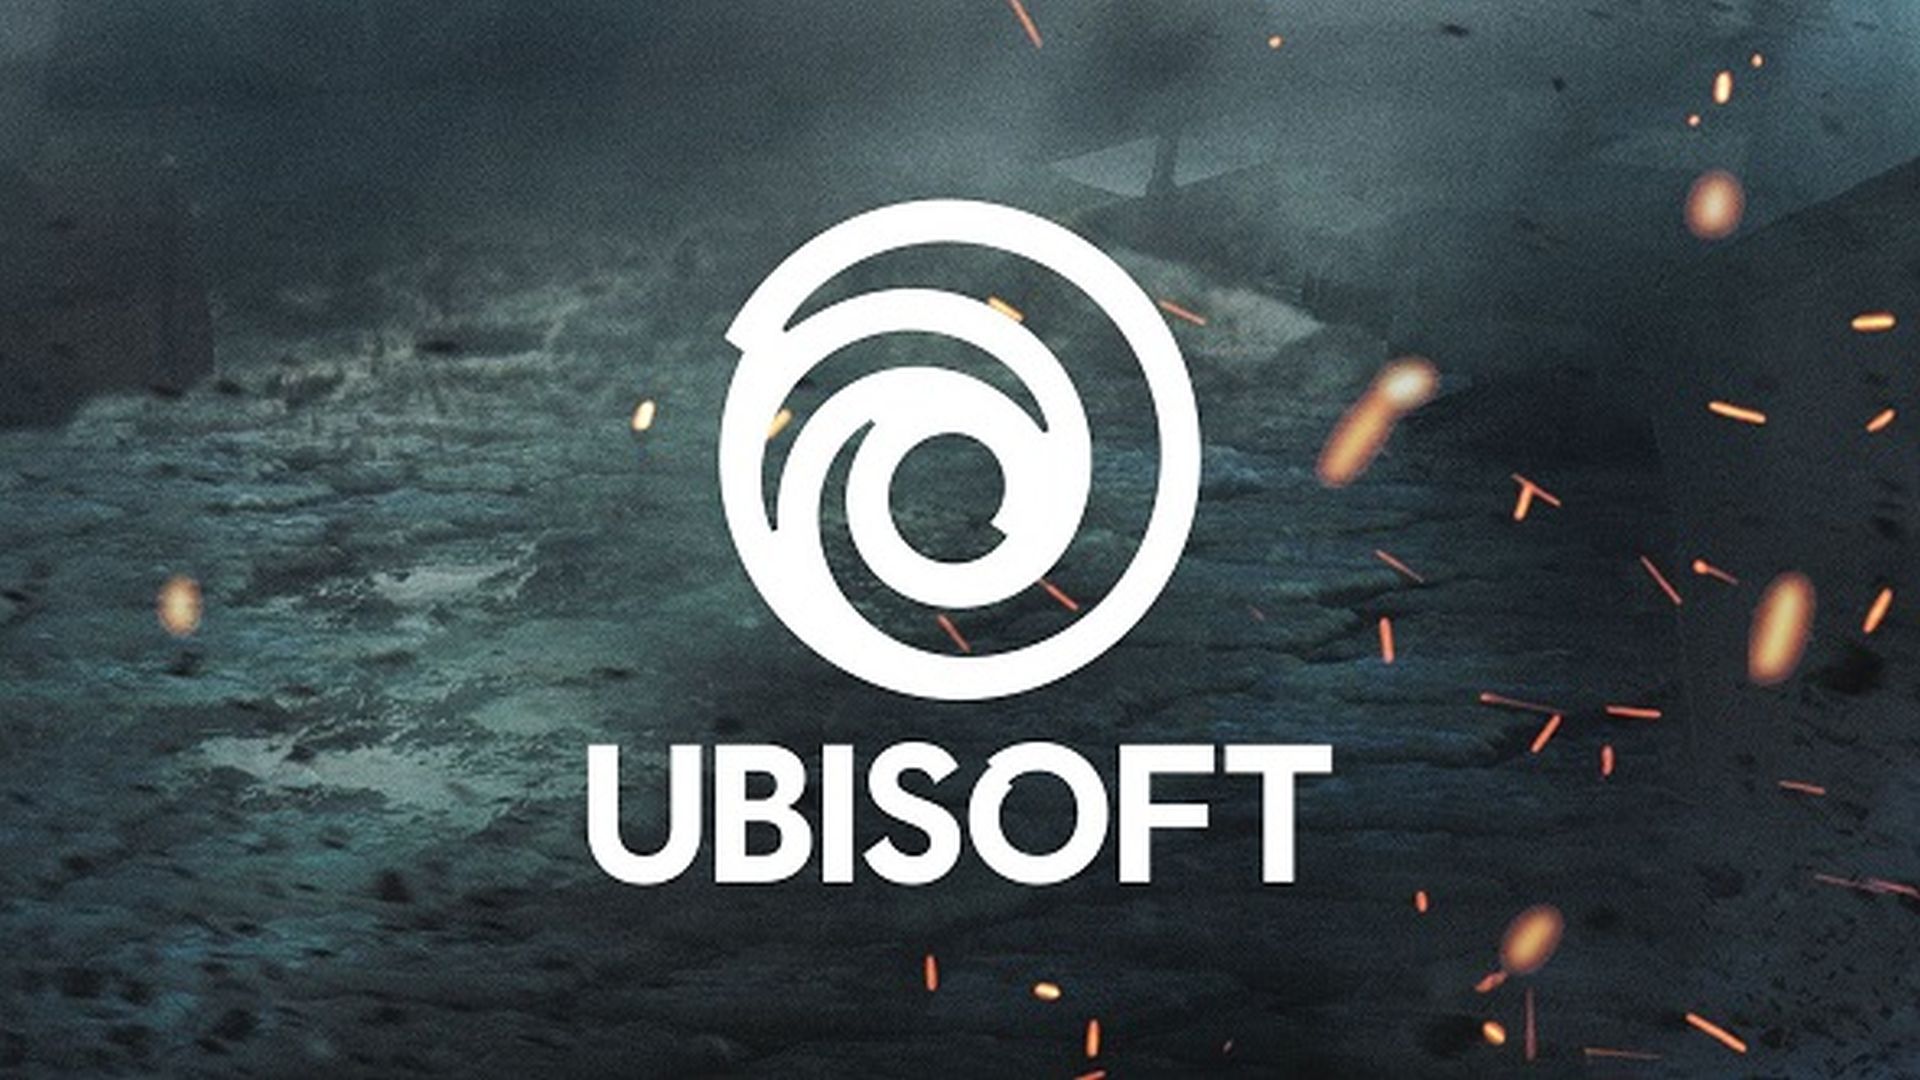 500 Ubisoft workers join protest over discrimination and abuse